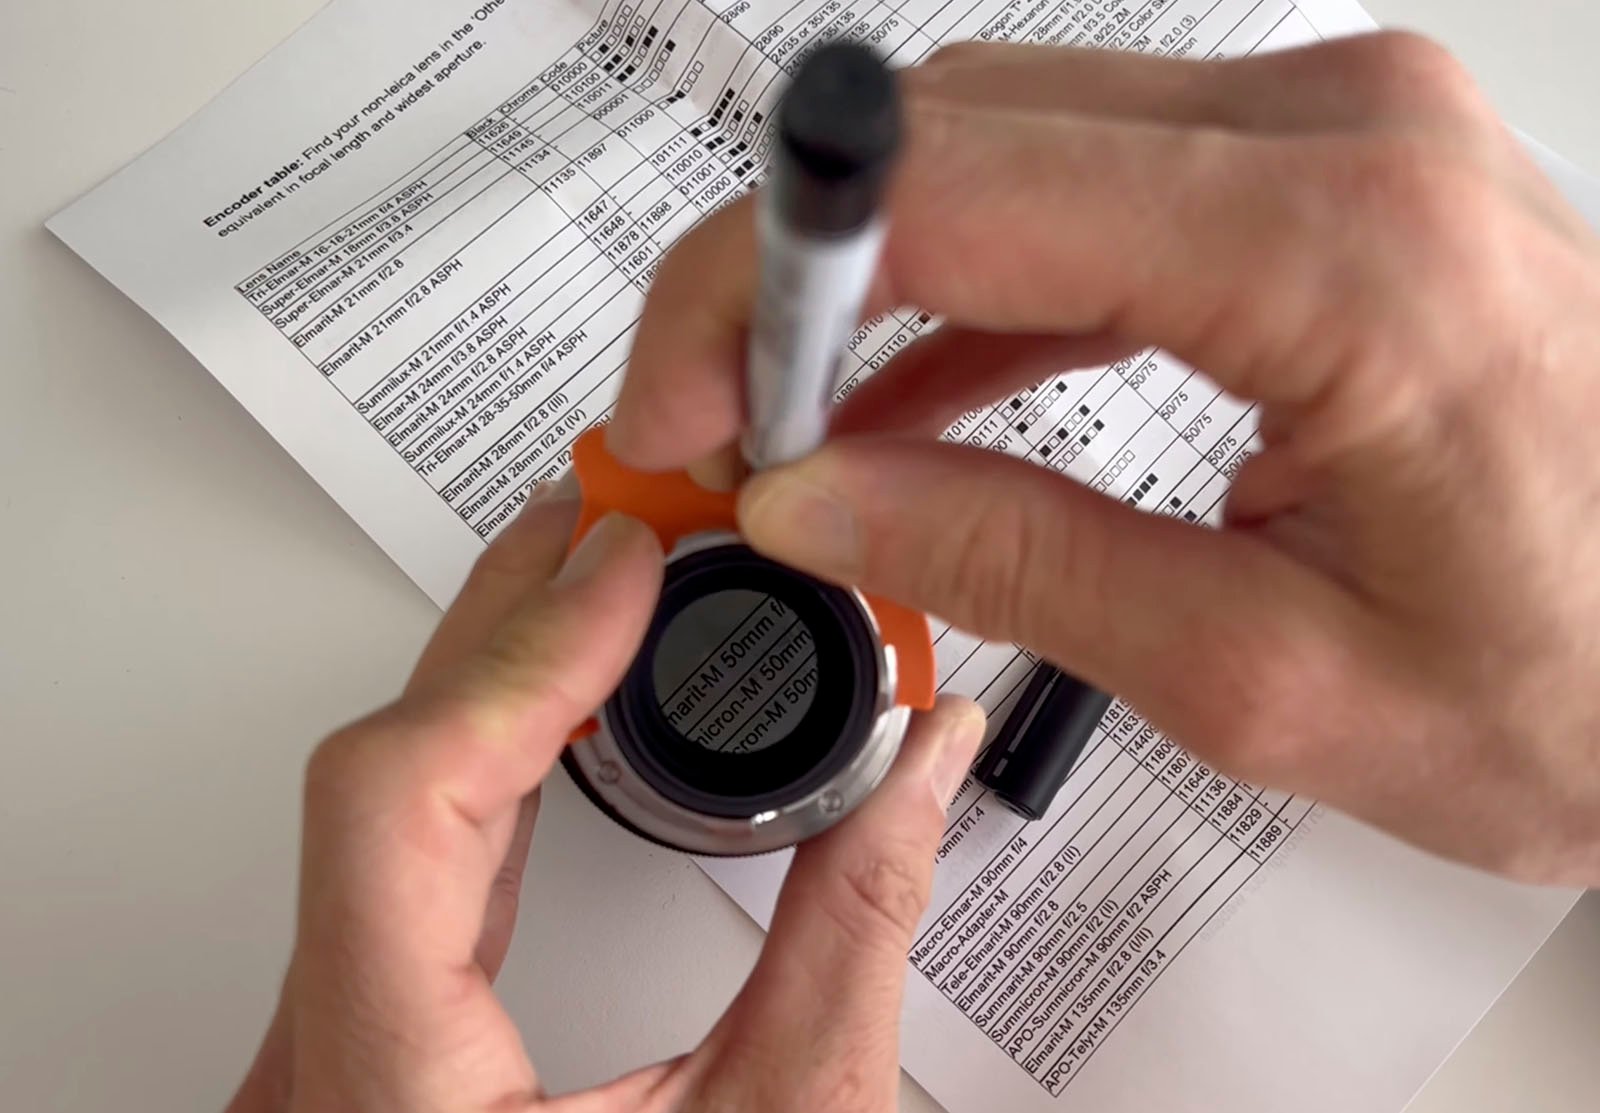 A person is holding an orange and black camera lens adapter and labeling it with a black marker. A printed chart with various details is partially visible on the desk underneath their hands.